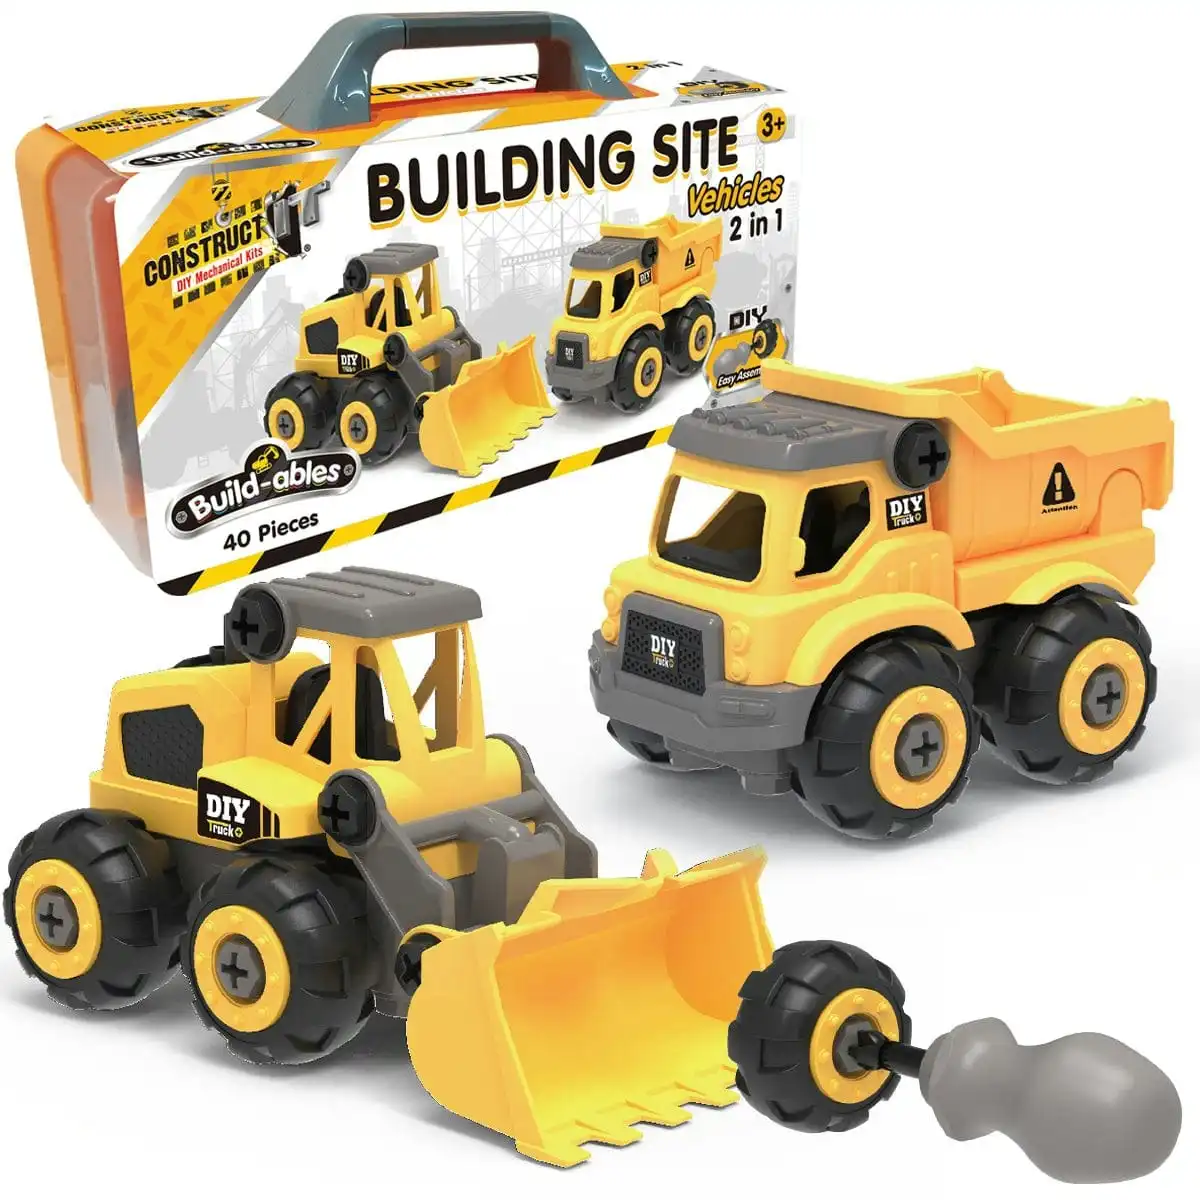 Build-ables Building Site Vehicles 2 in 1